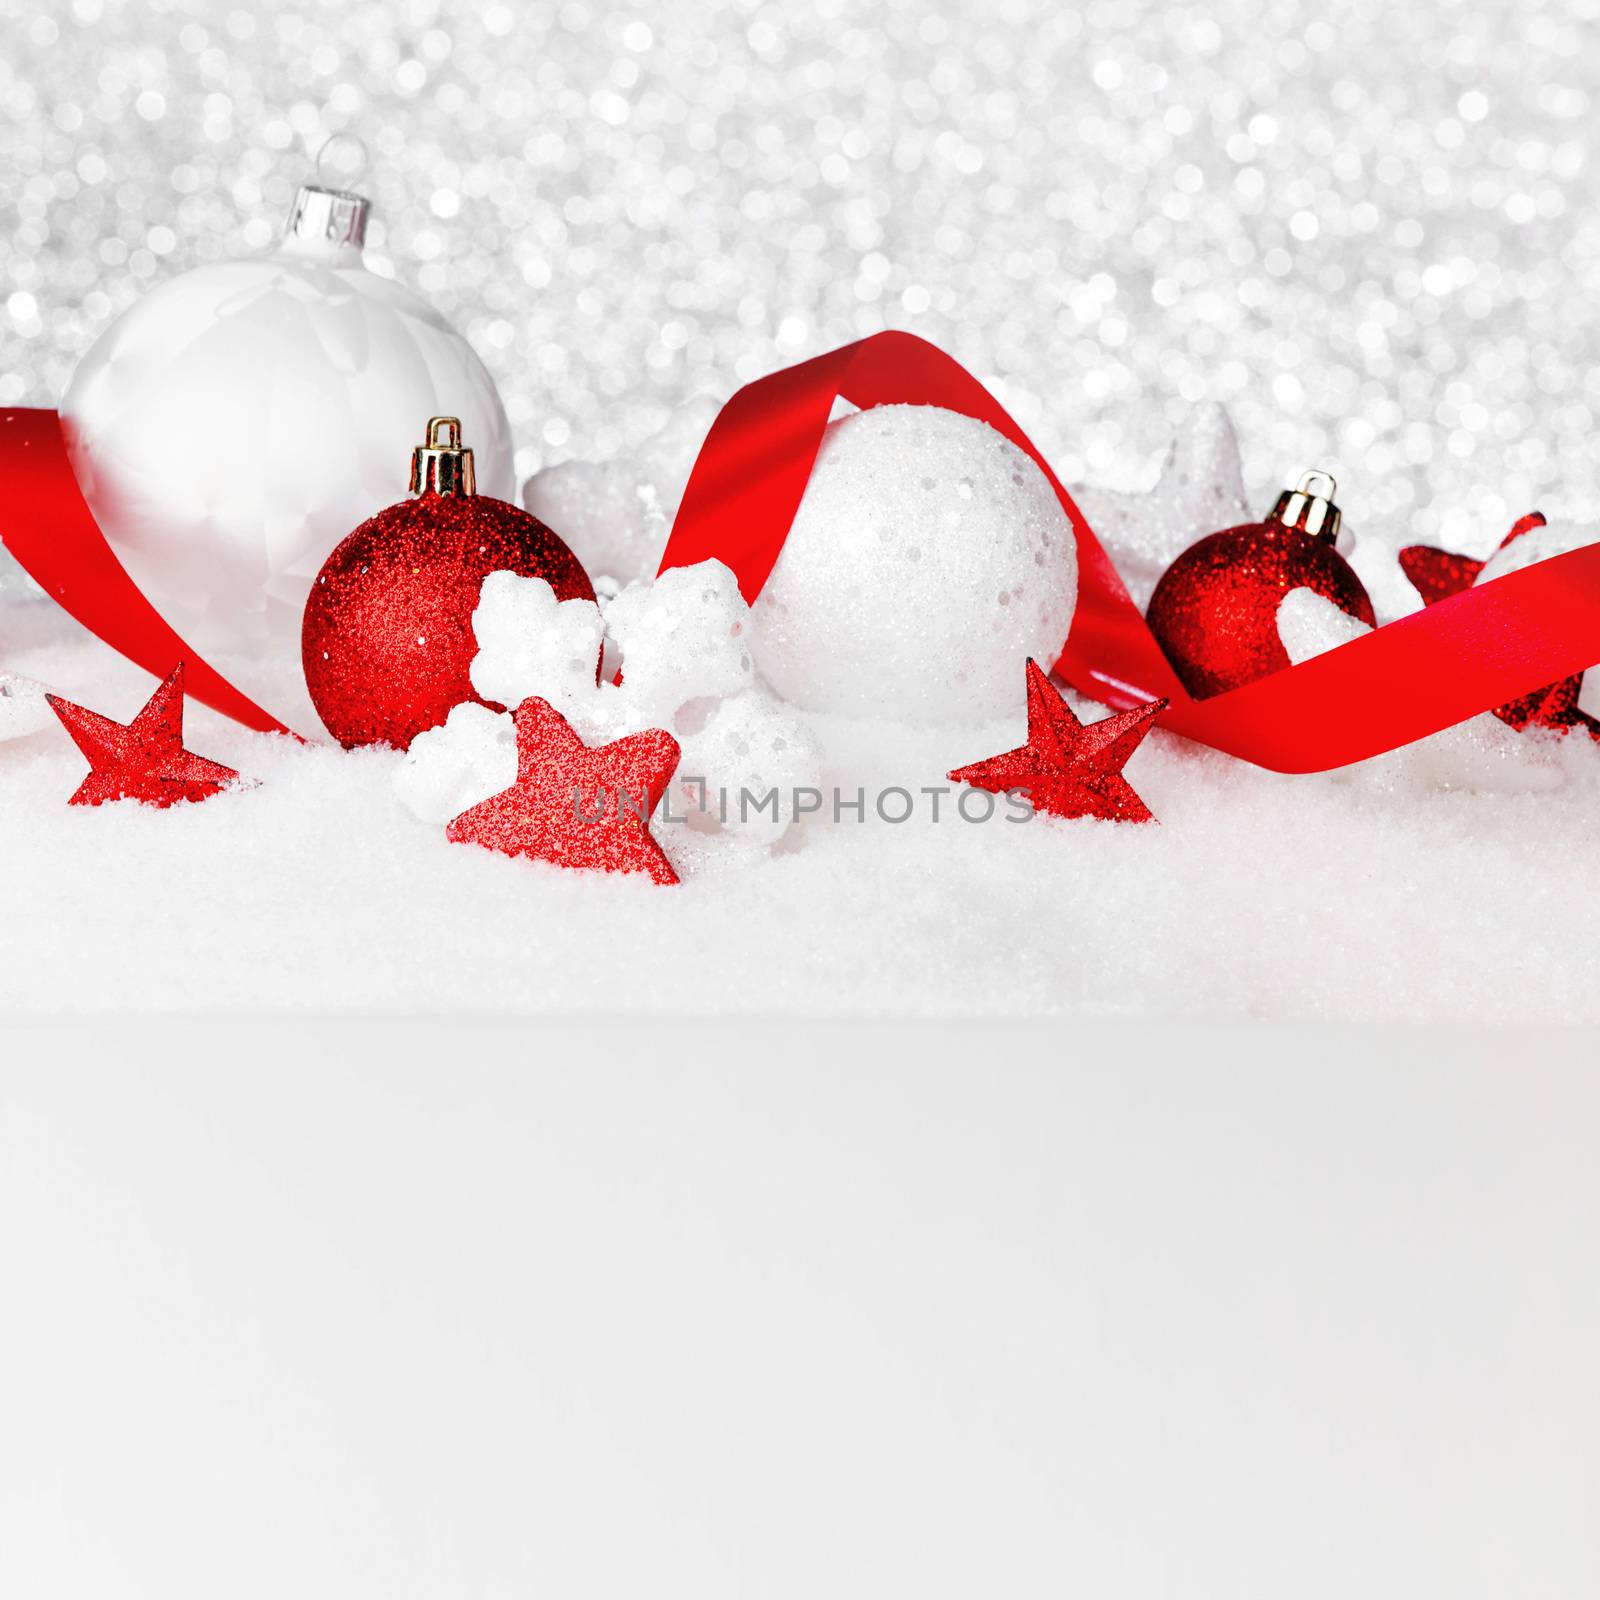 Christmas decorations in snow by Yellowj